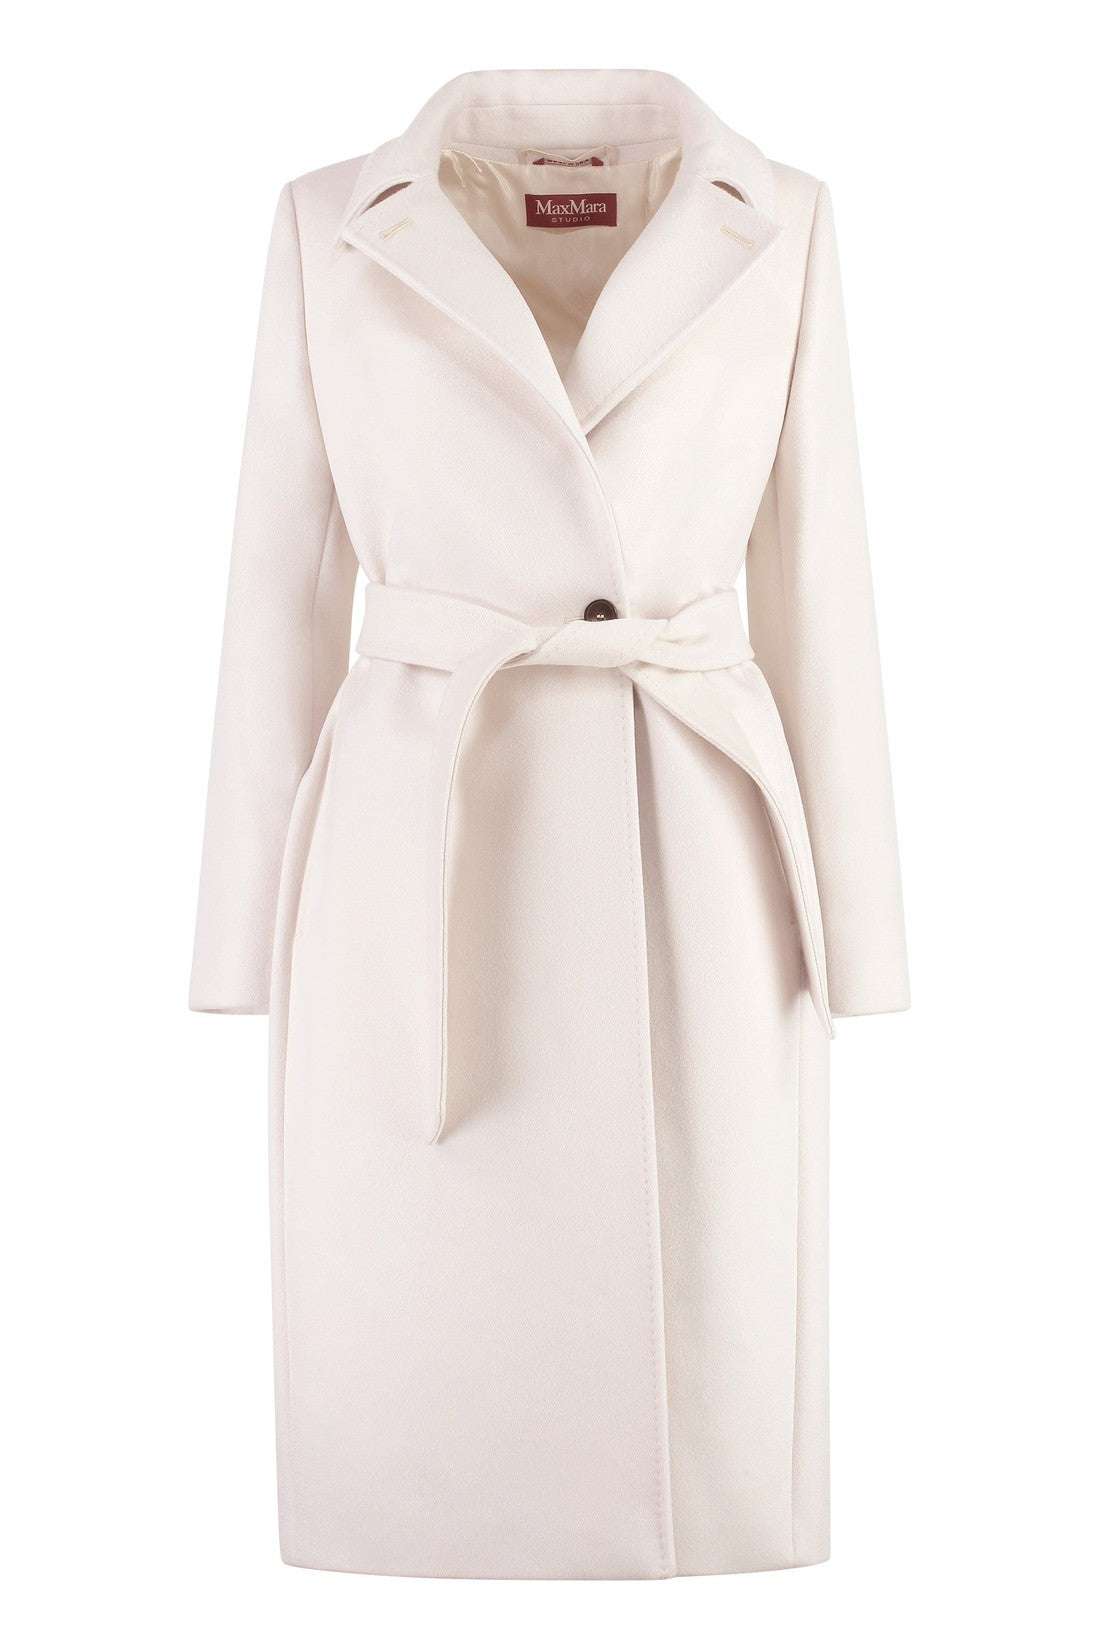 Max Mara Studio-OUTLET-SALE-Bcollage double-breasted wool coat-ARCHIVIST